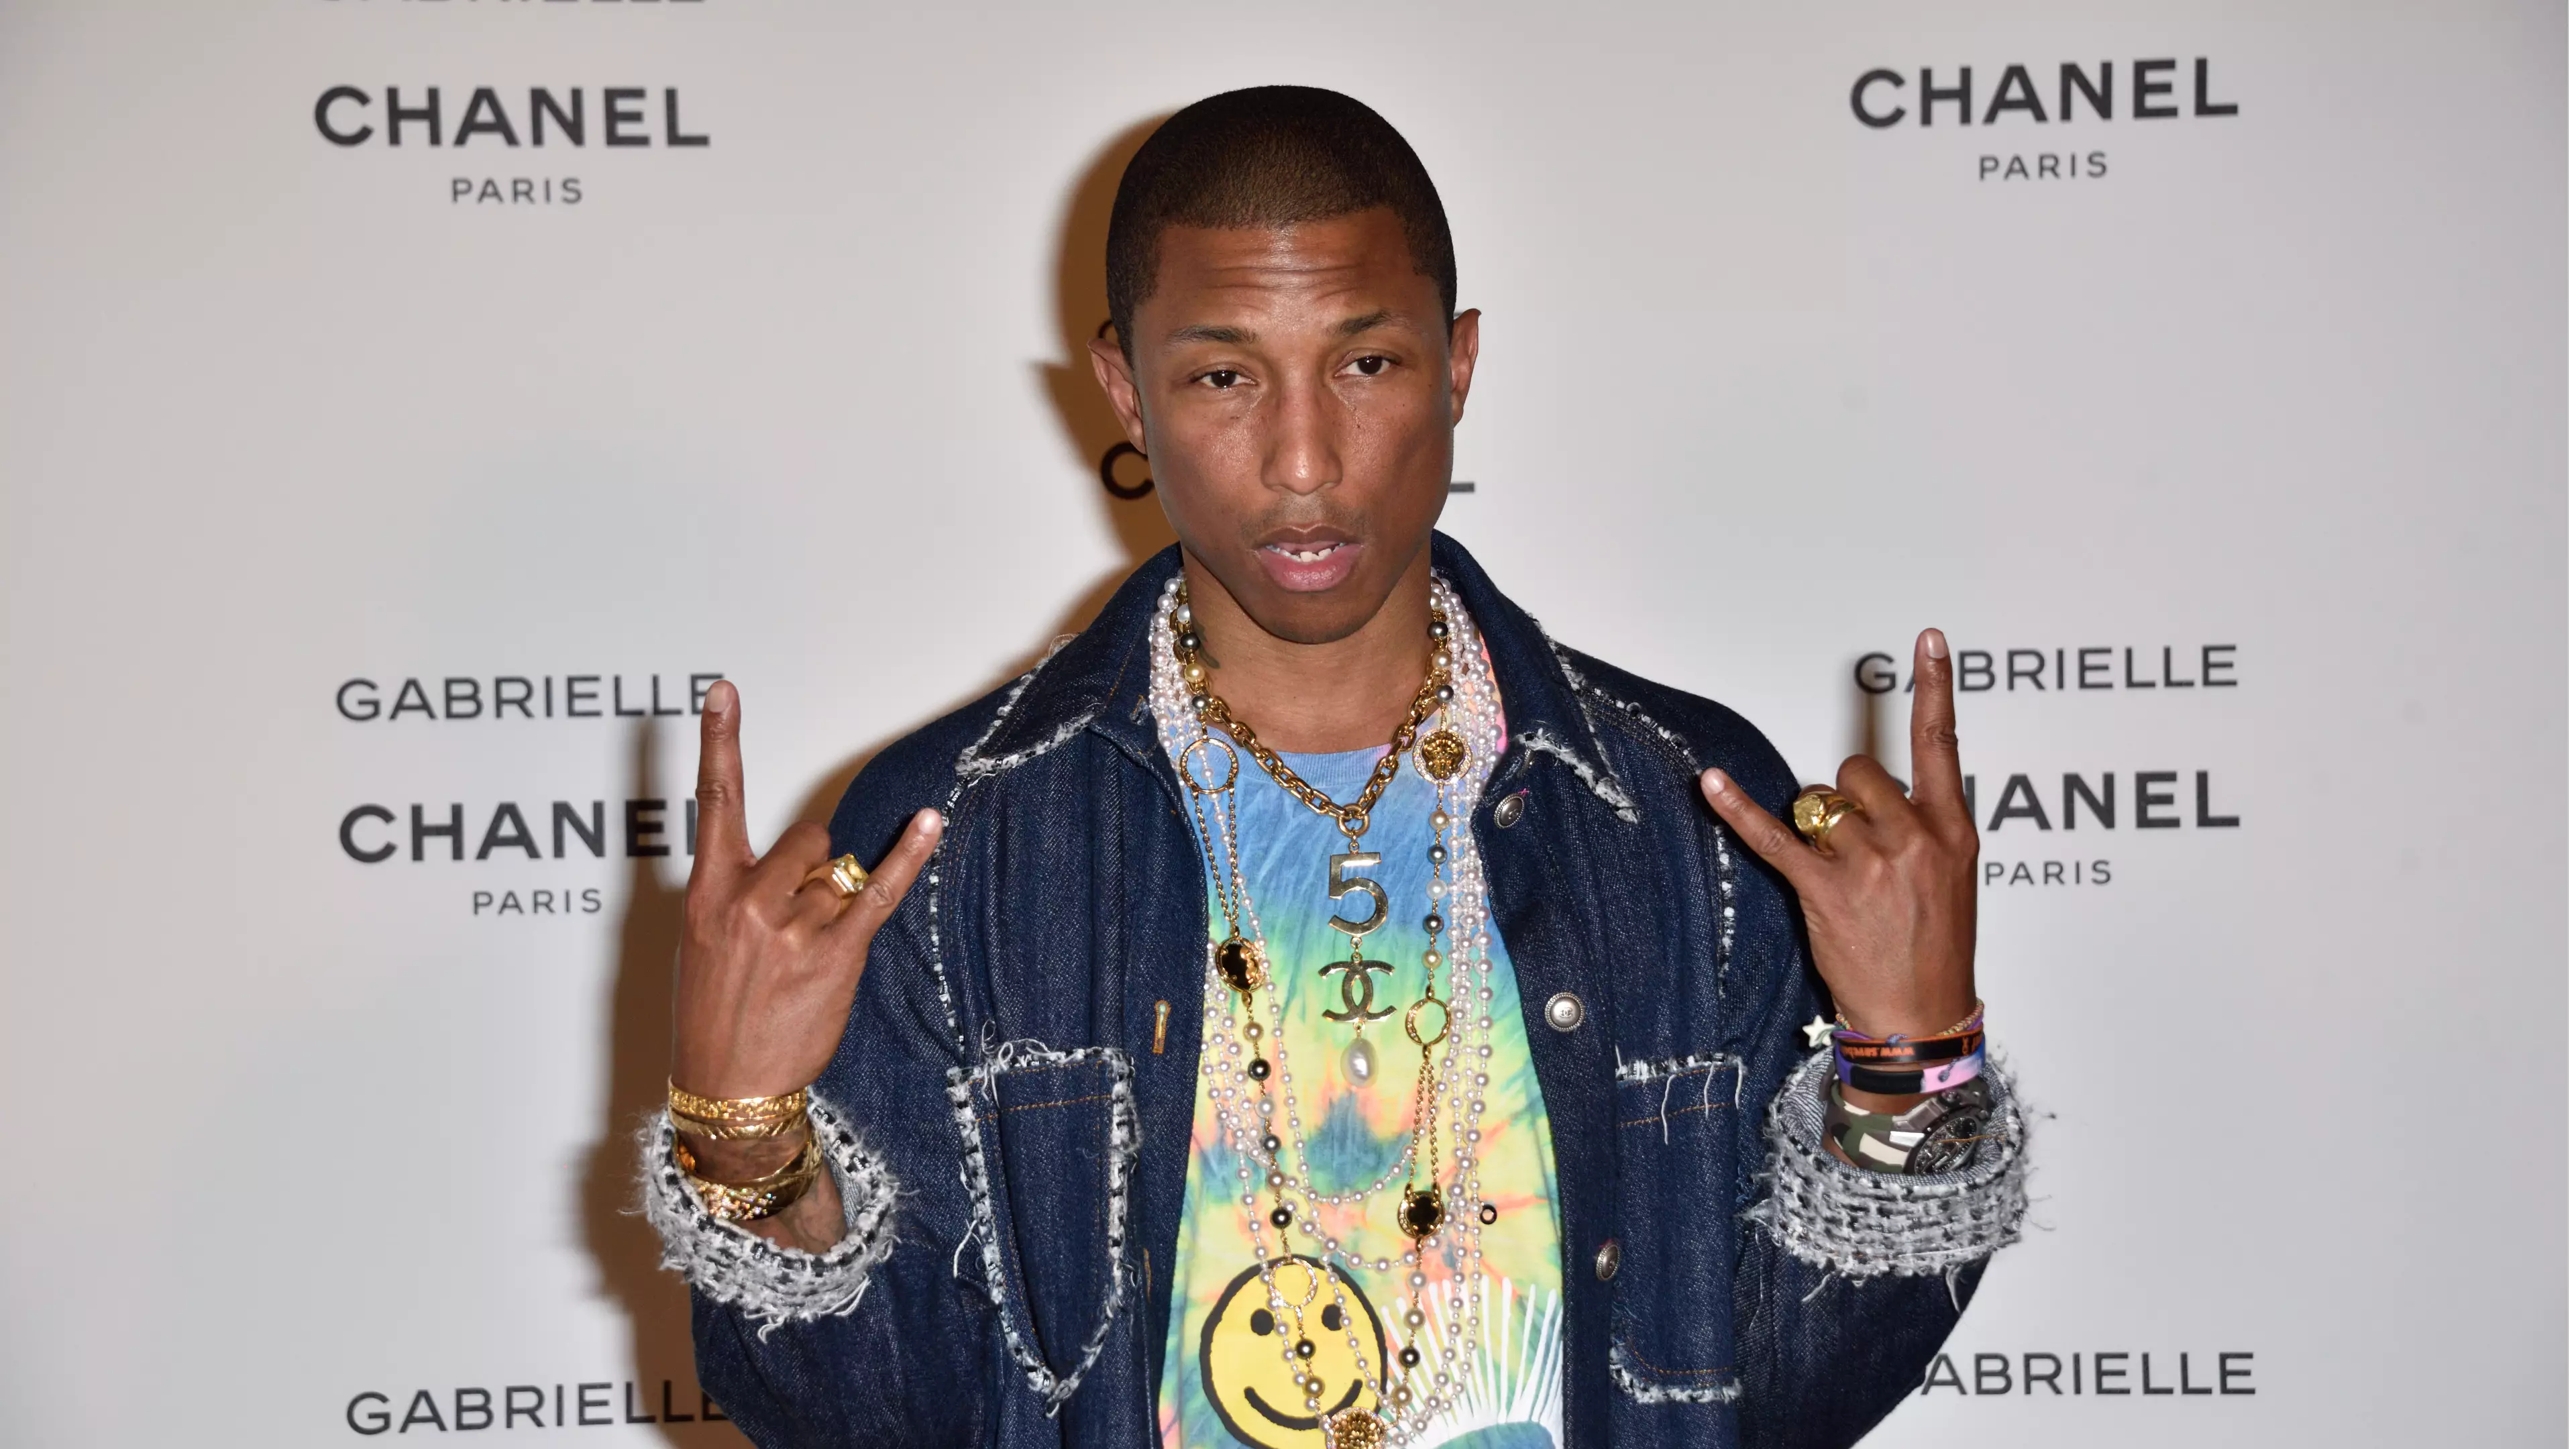 Pharrell Williams Reveals How He Manages To Look So Young At 44